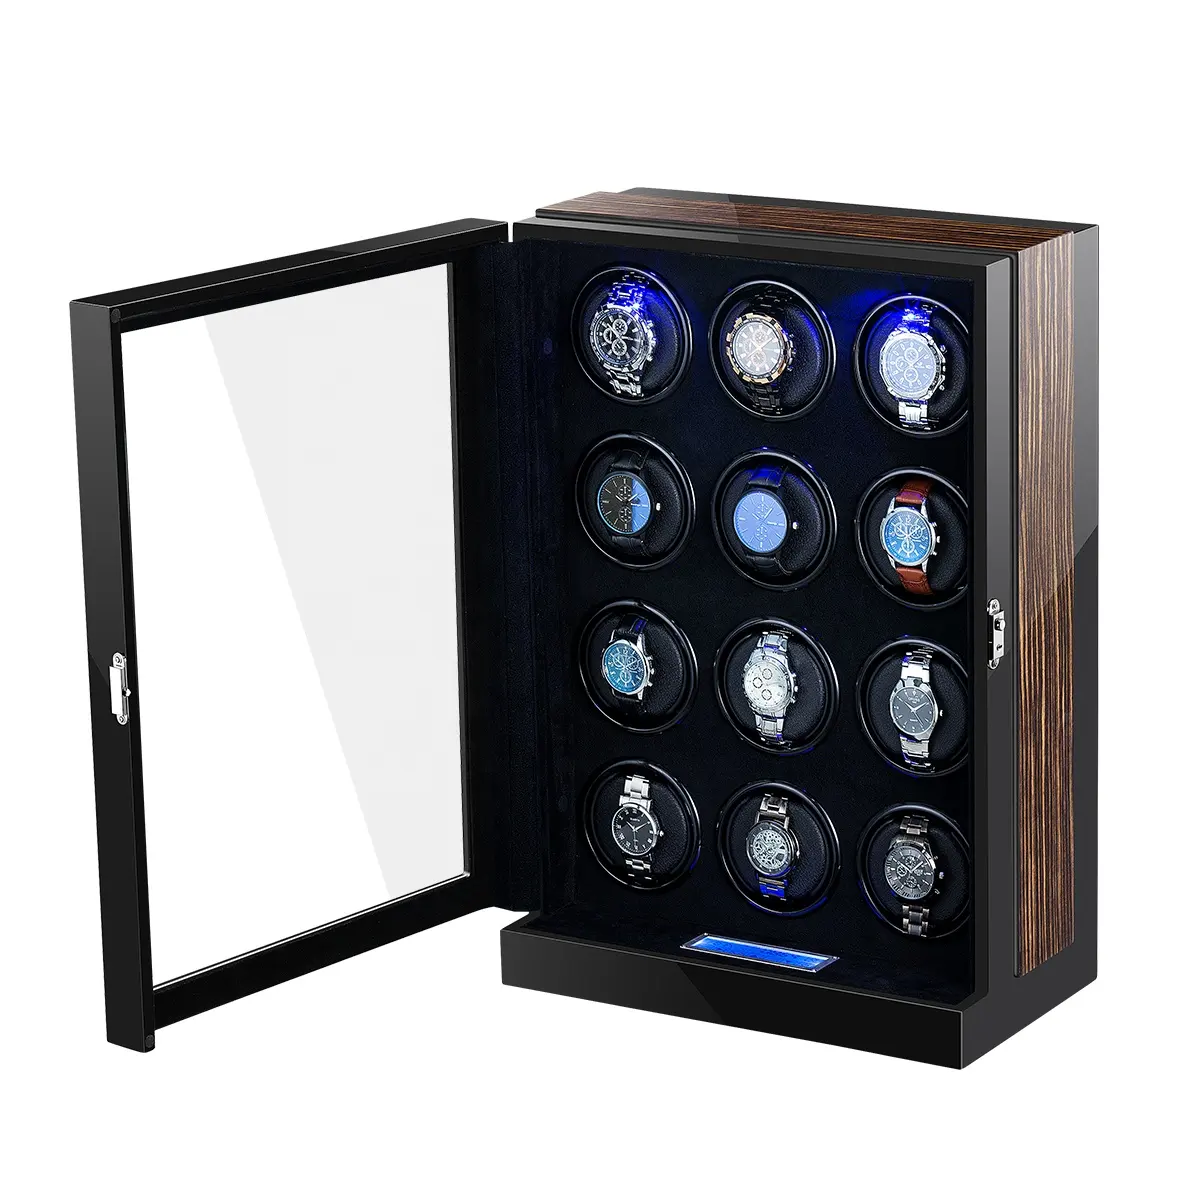 China watch winder box with EMC certificates store battery automatic safe watch winder